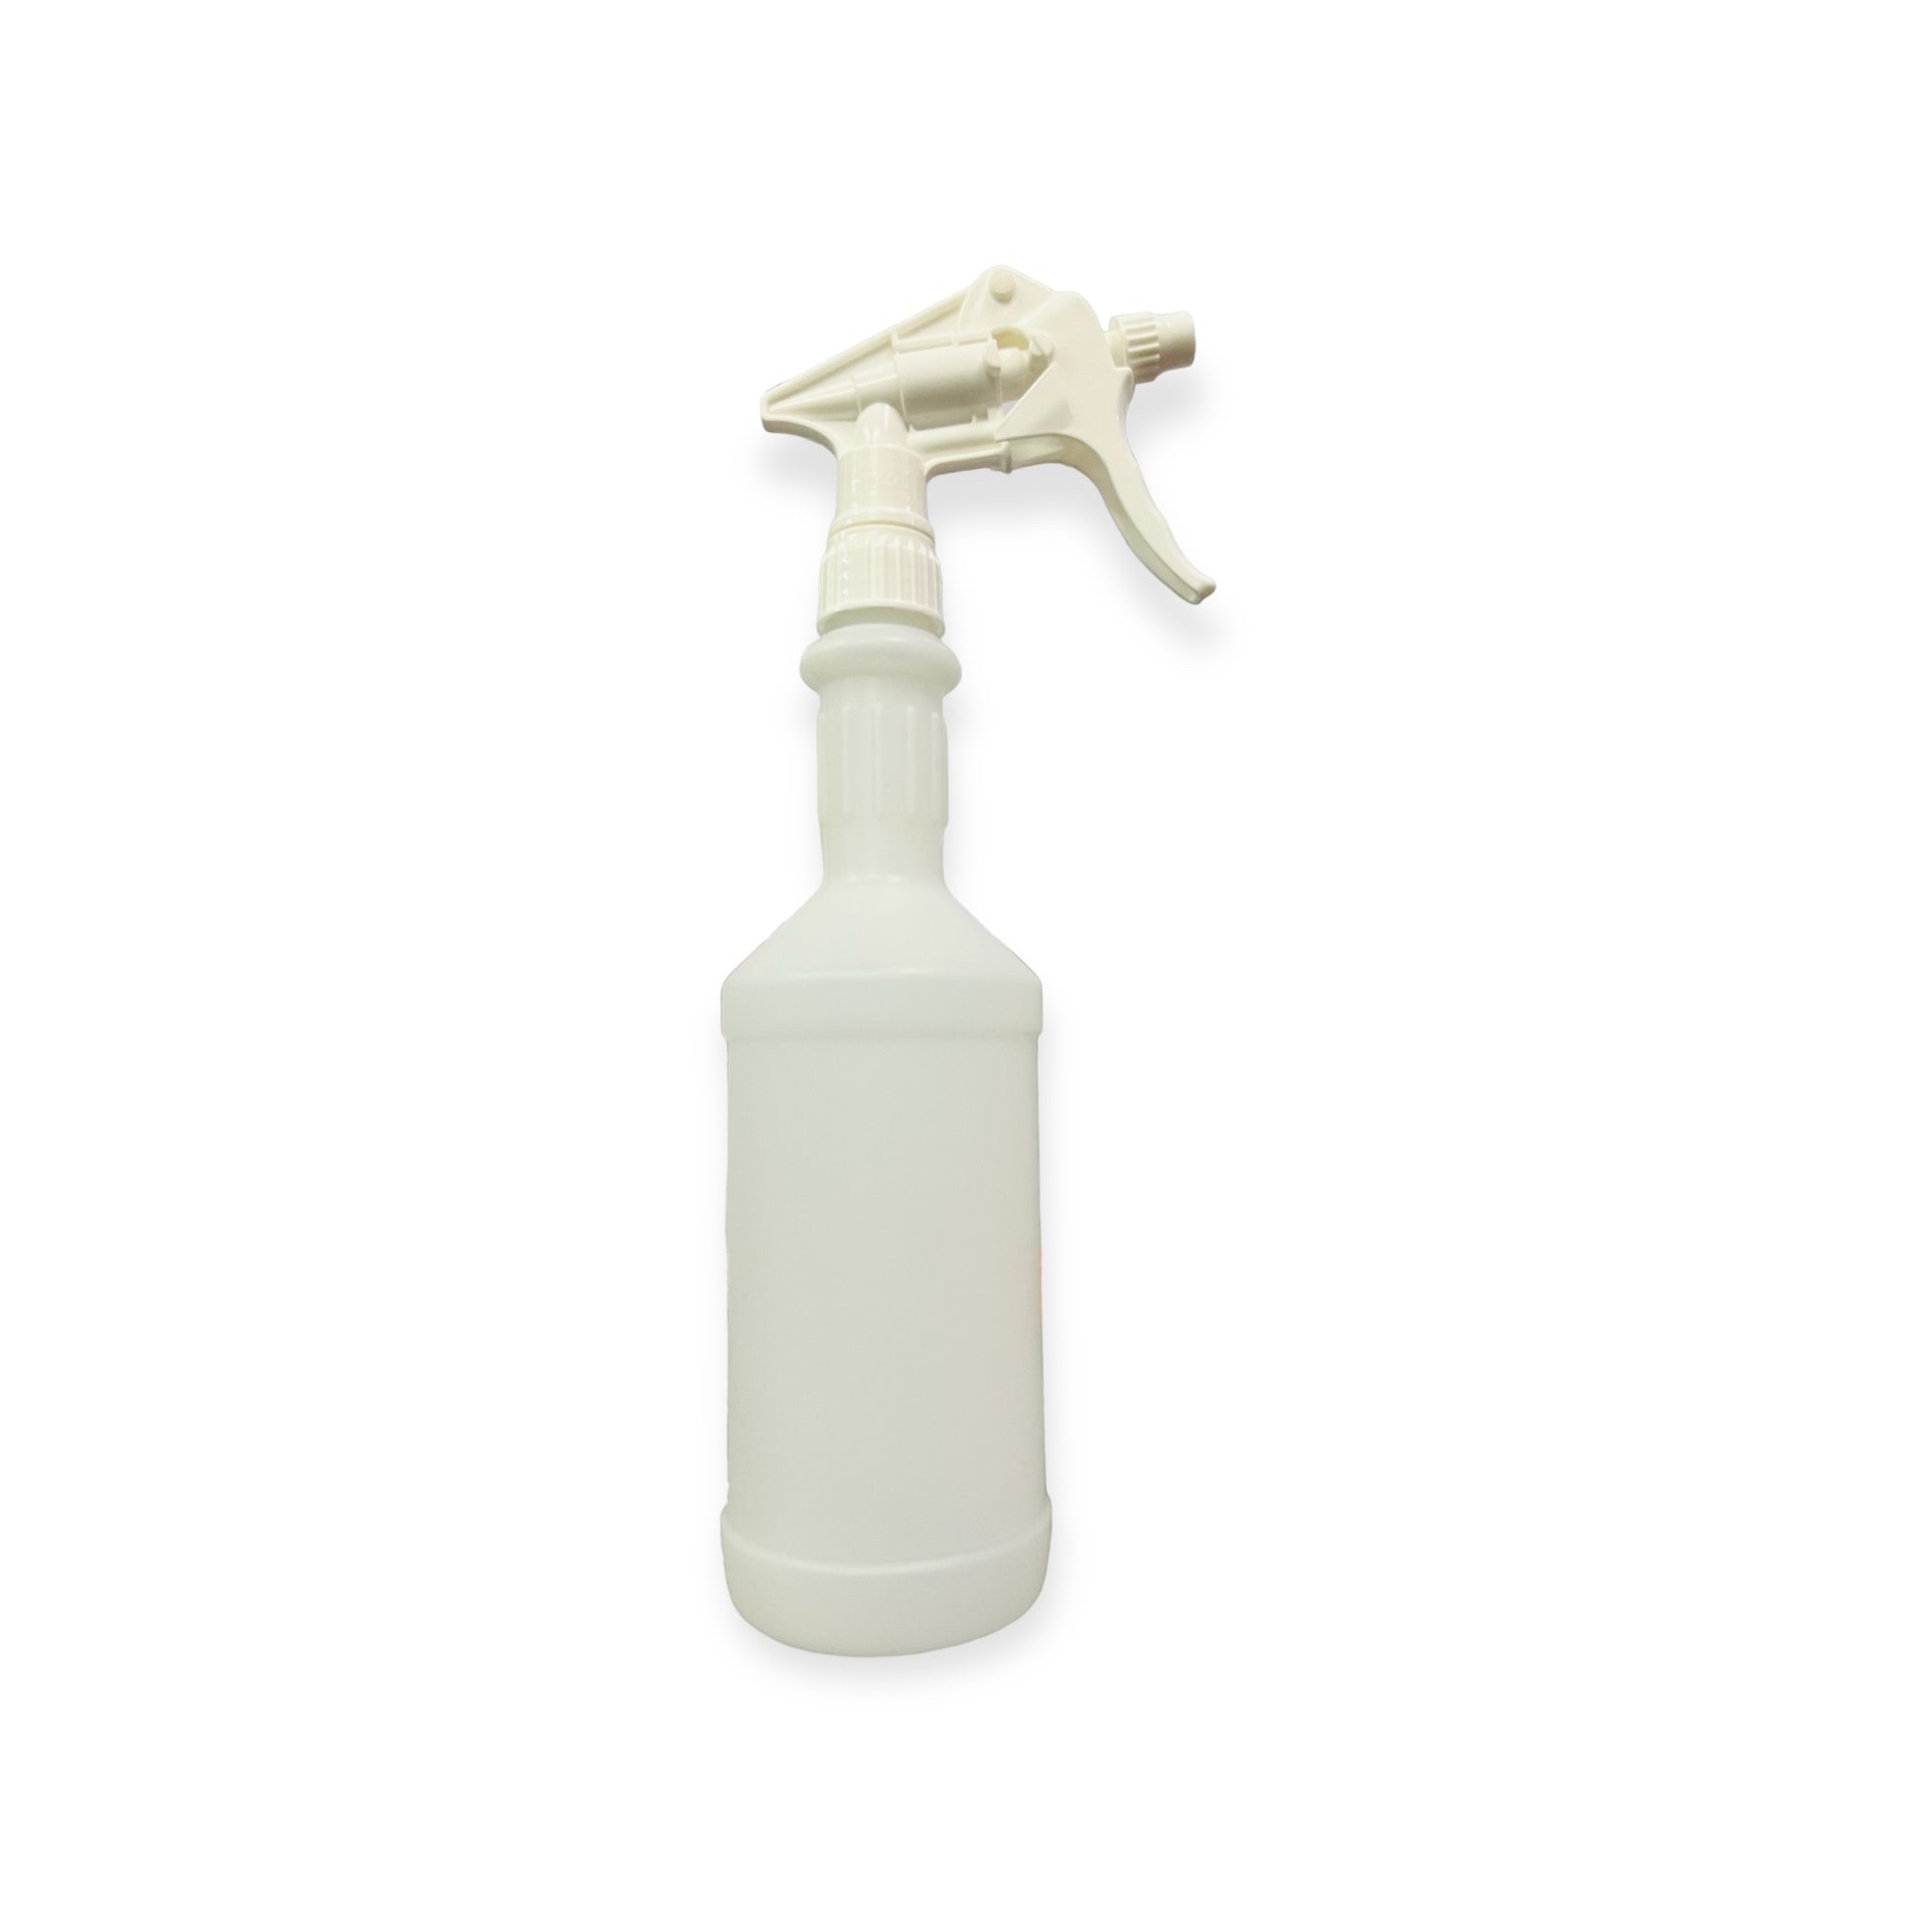 750ml clear bottle with white commercial trigger